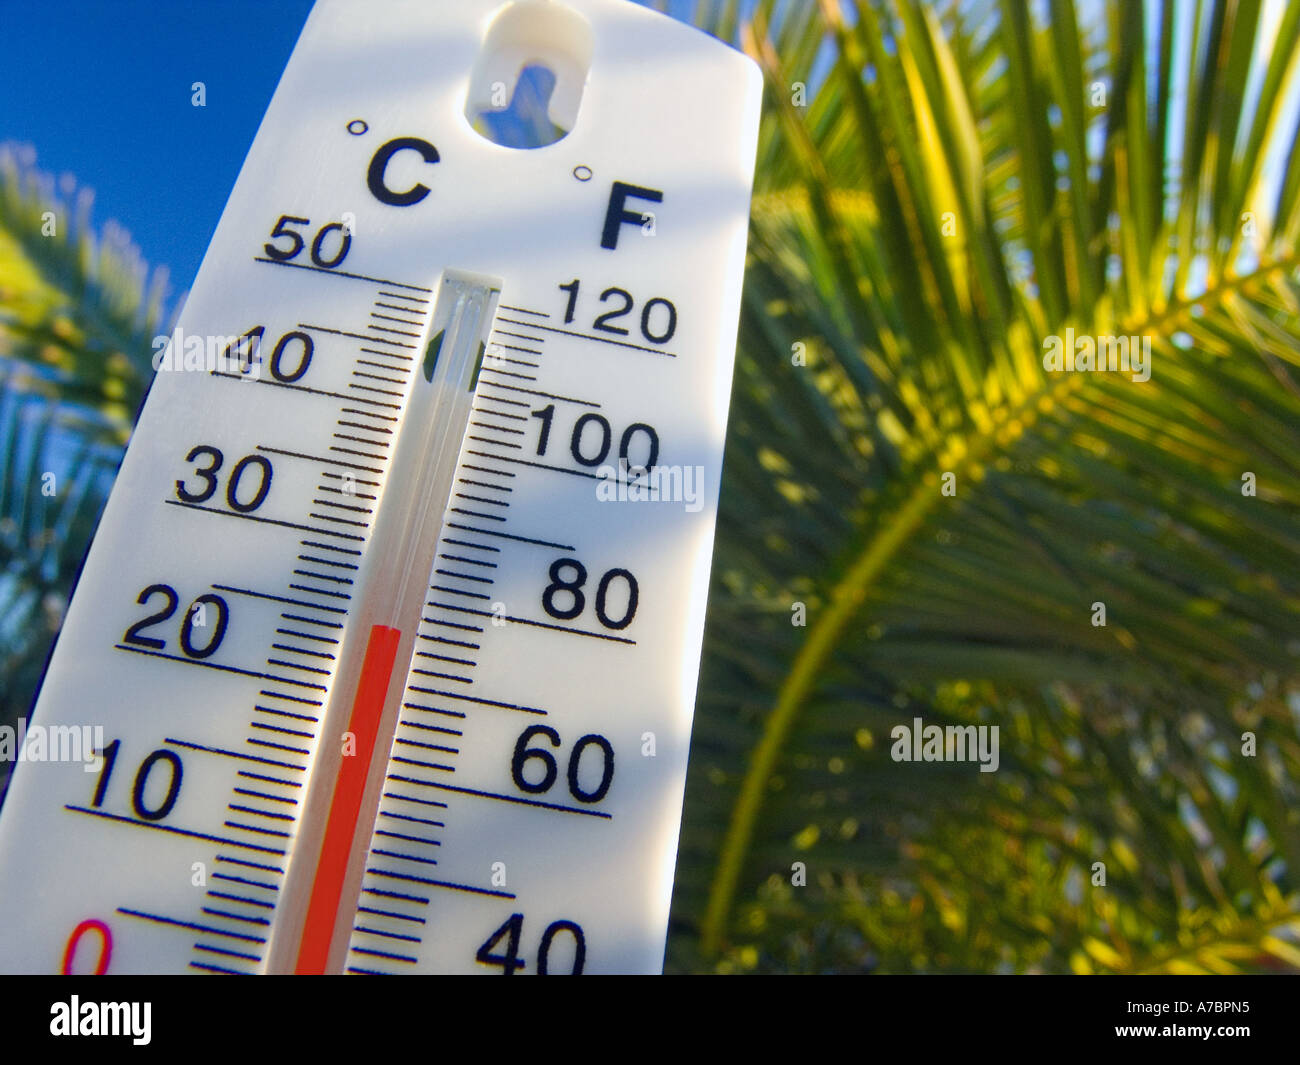 Thermometer for Measuring Air Temperature on White Background. Front View  Stock Photo - Image of fahrenheit, meter: 196742528